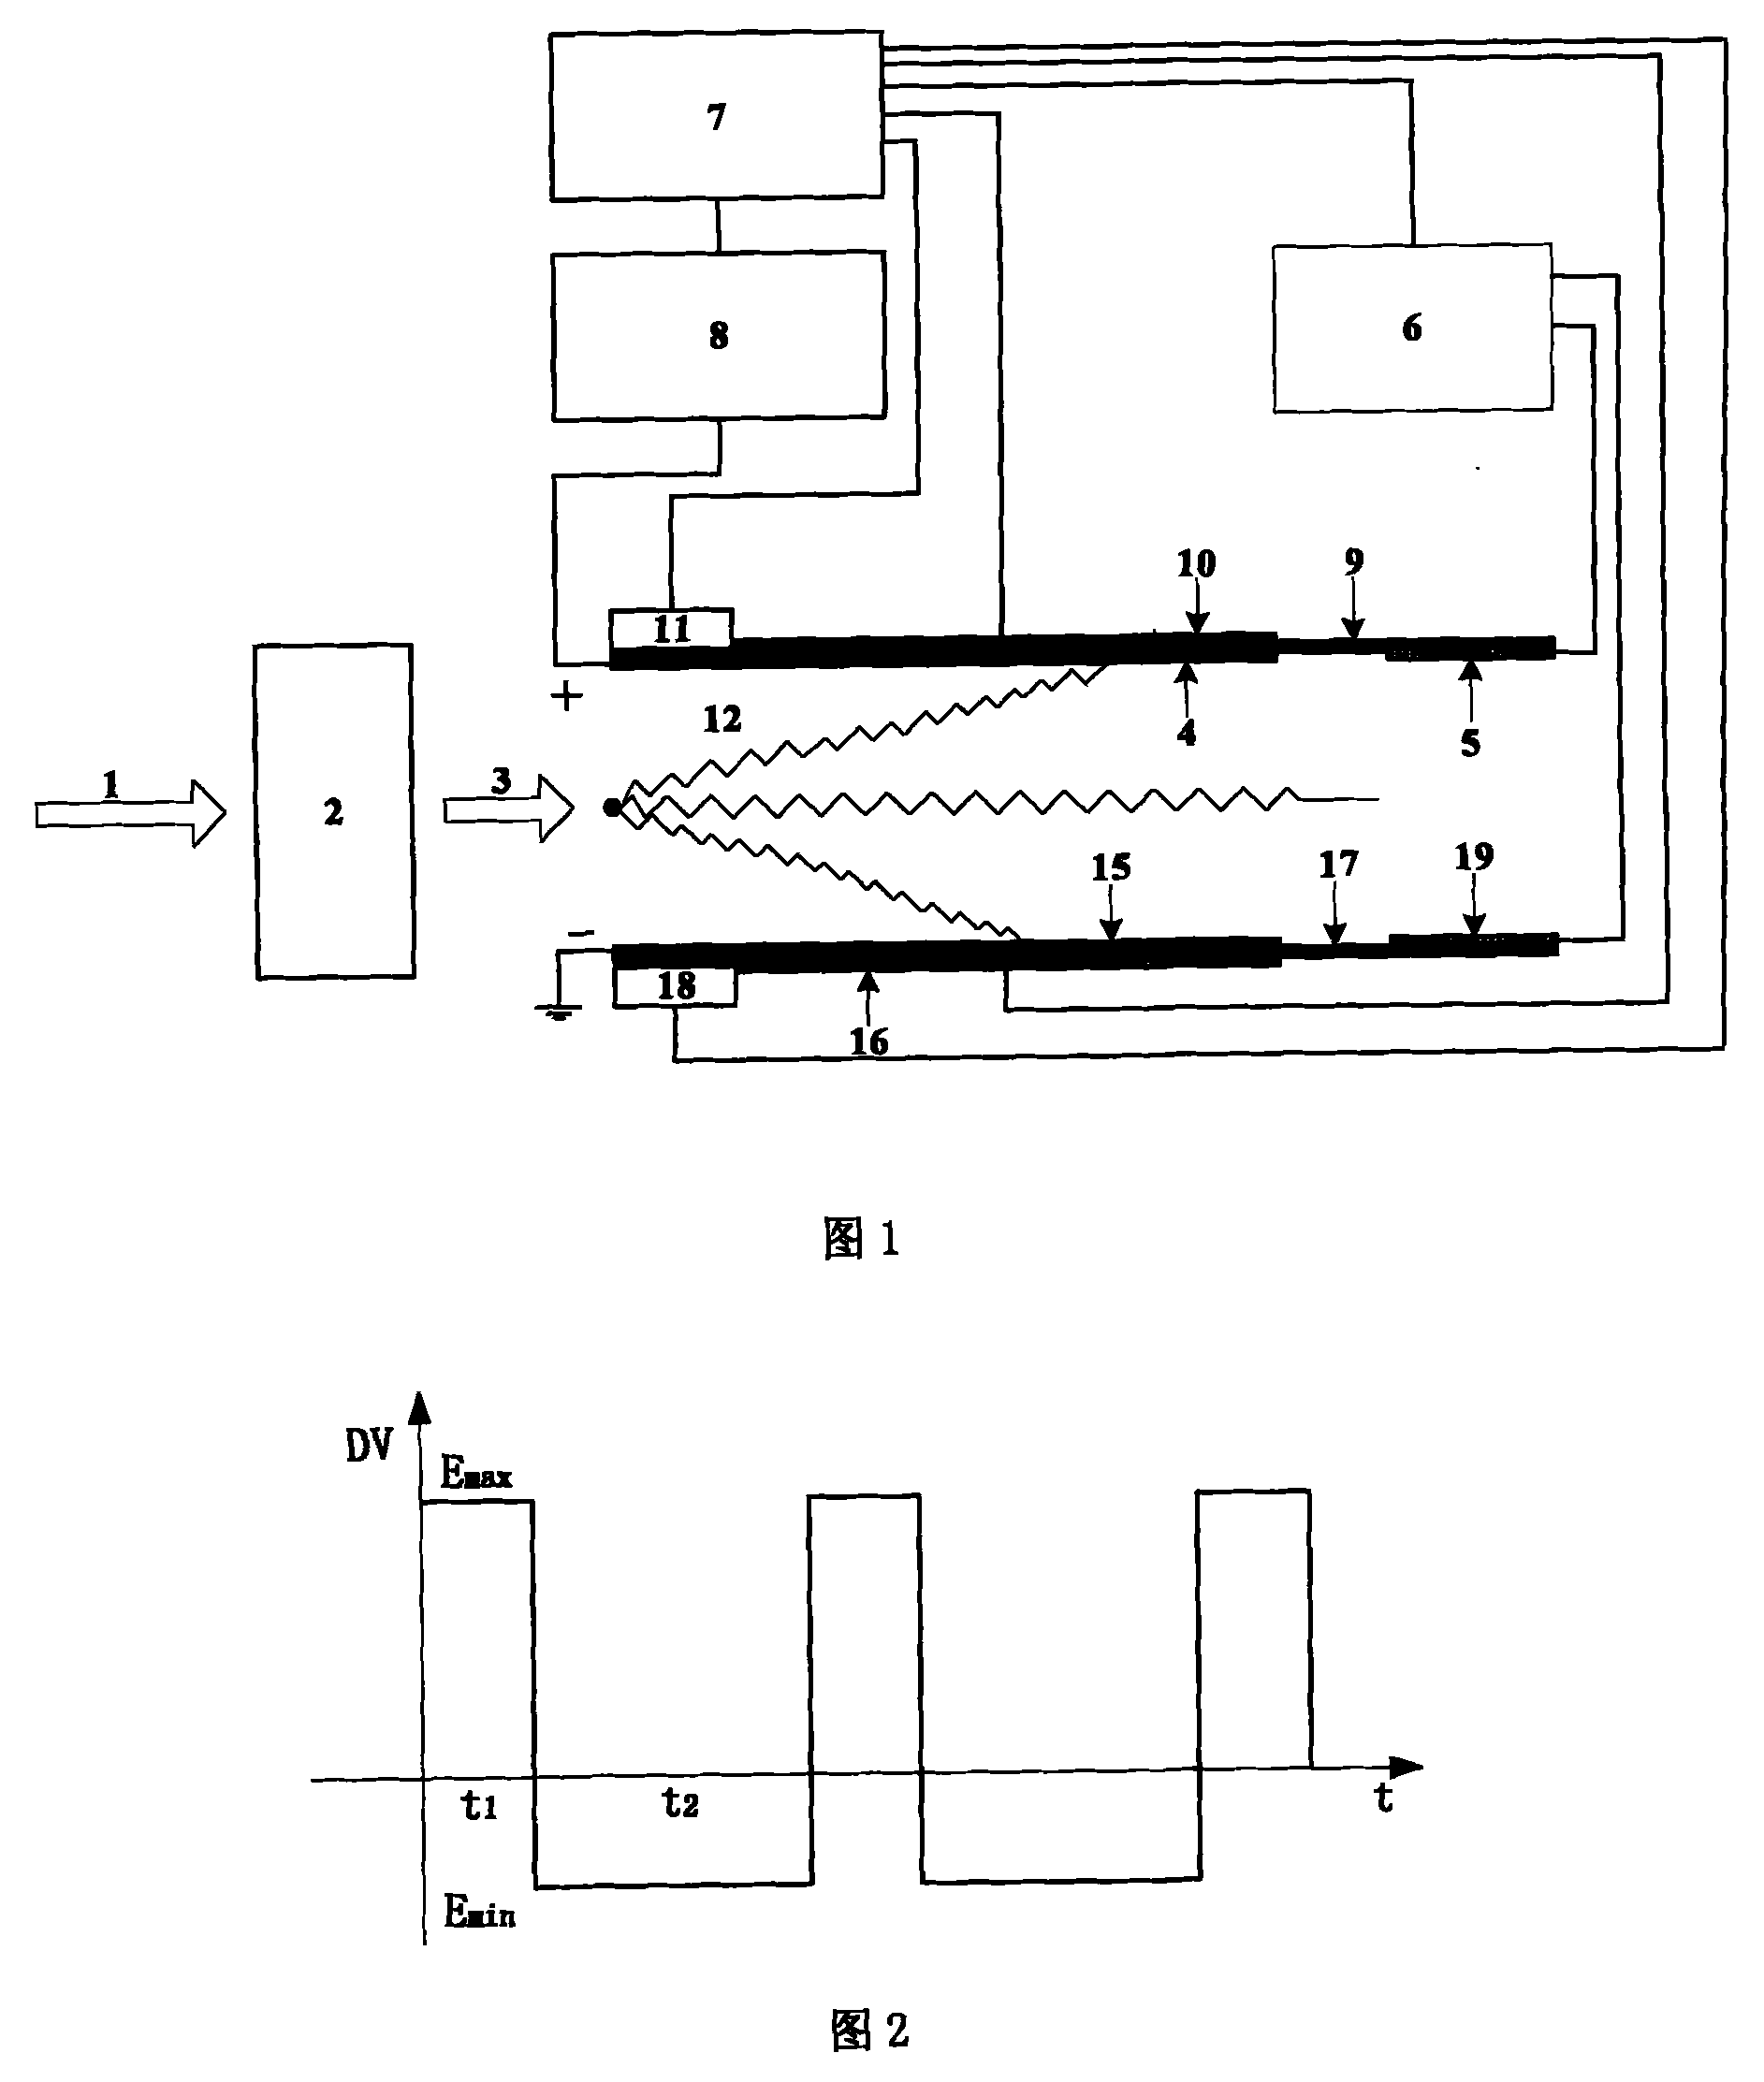 Device for measuring substance ingredient